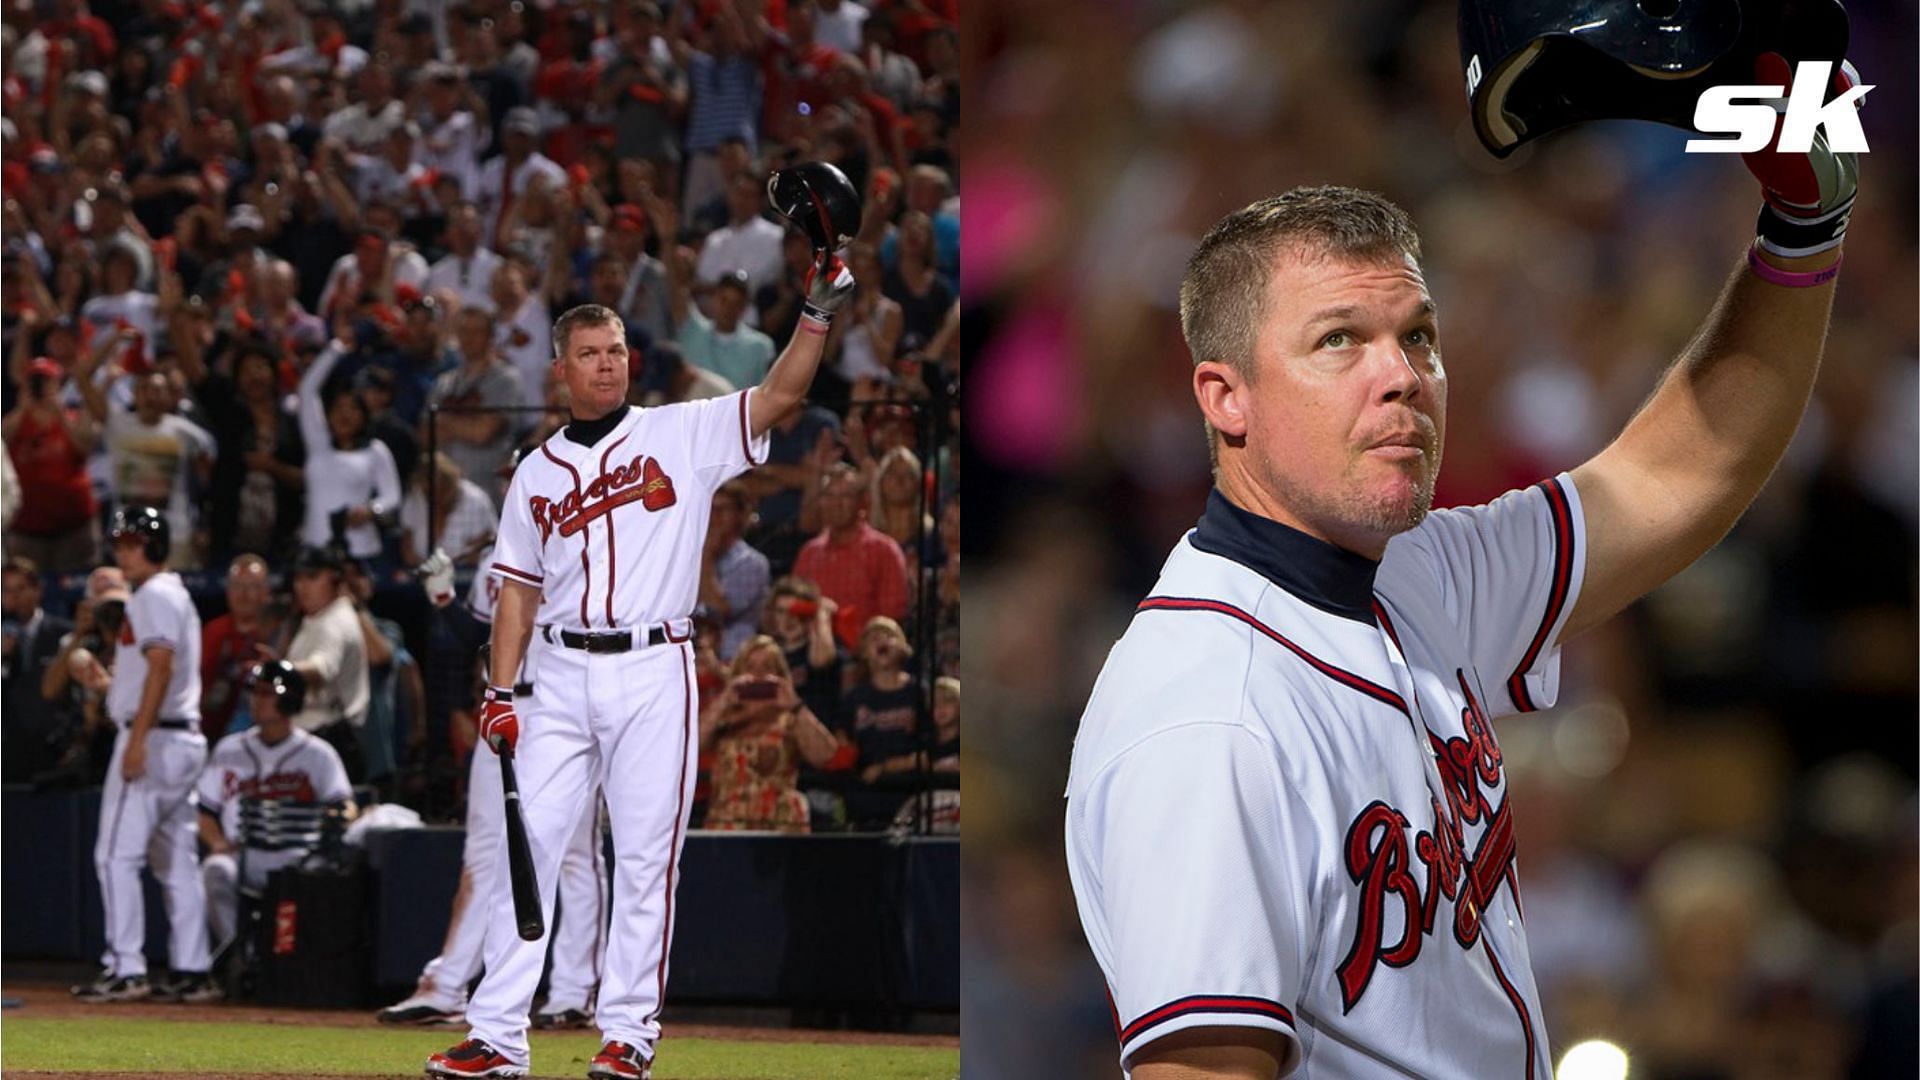 Chipper Jones - We've been friends from the time we could pick up